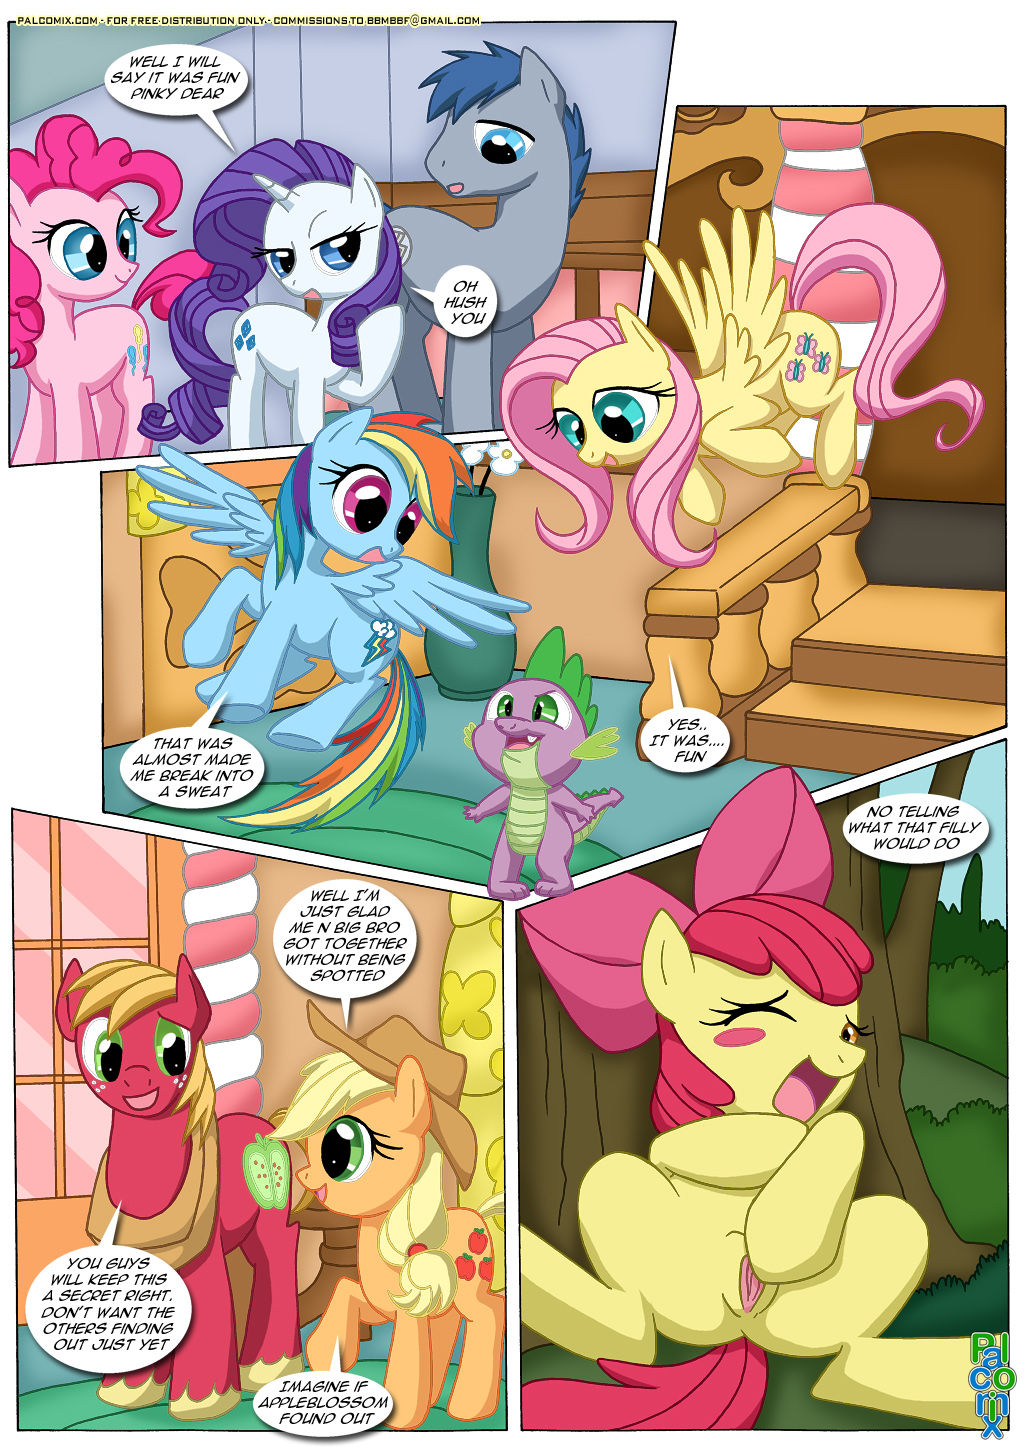 [Palcomix] Pinky's Porntastic Party (My Little Pony: Friendship is Magic) 